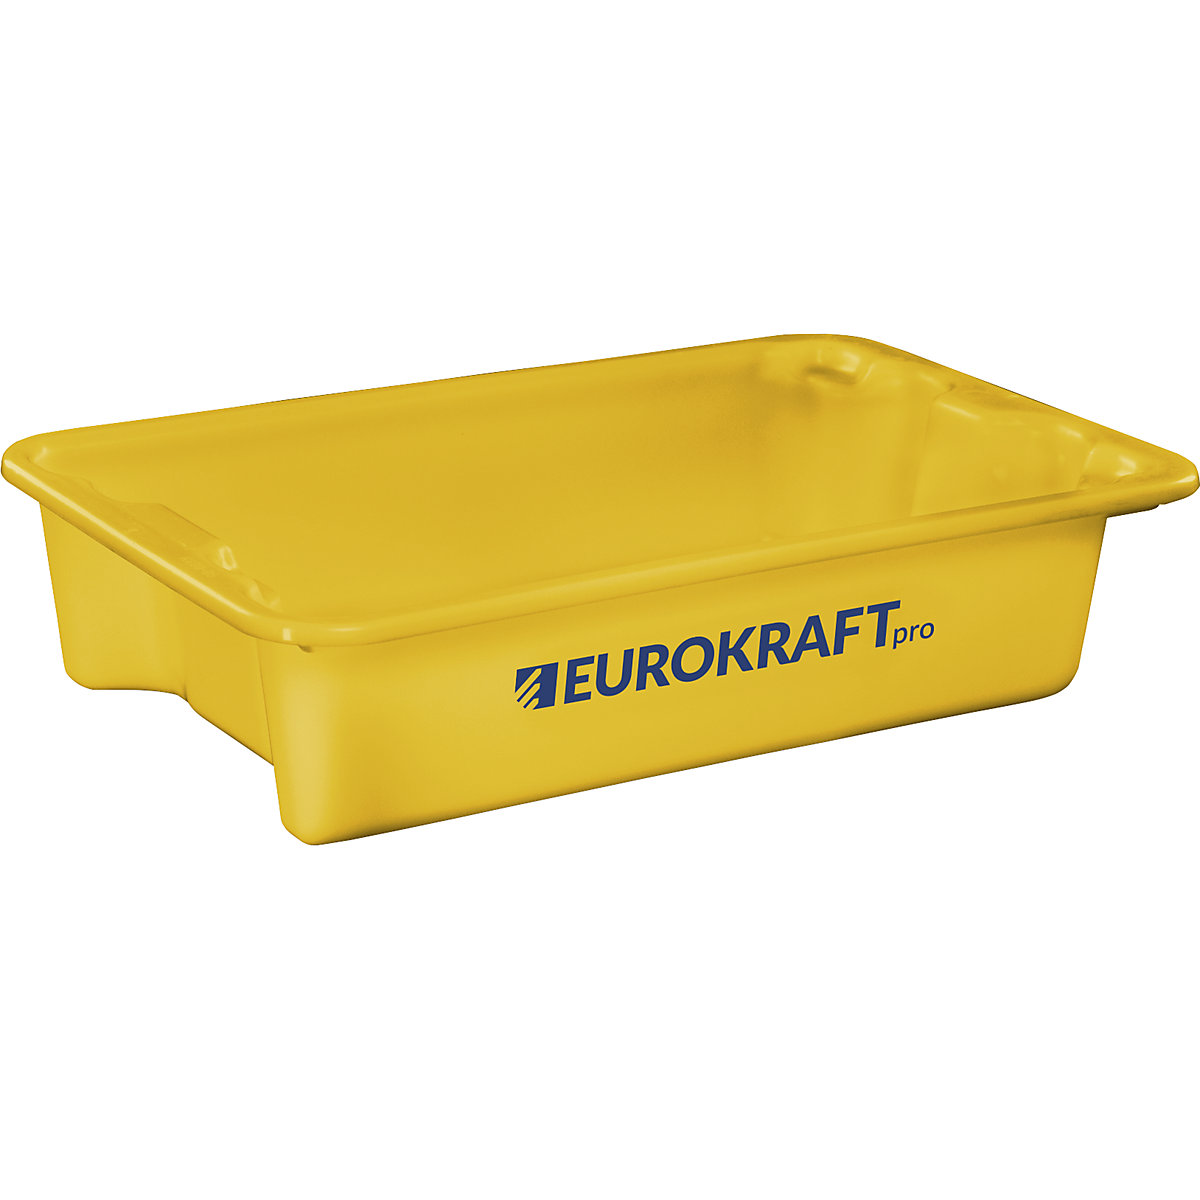 EUROKRAFTpro – Stack/nest container made of polypropylene suitable for foodstuffs, 18 l capacity, pack of 3, solid walls and base, yellow